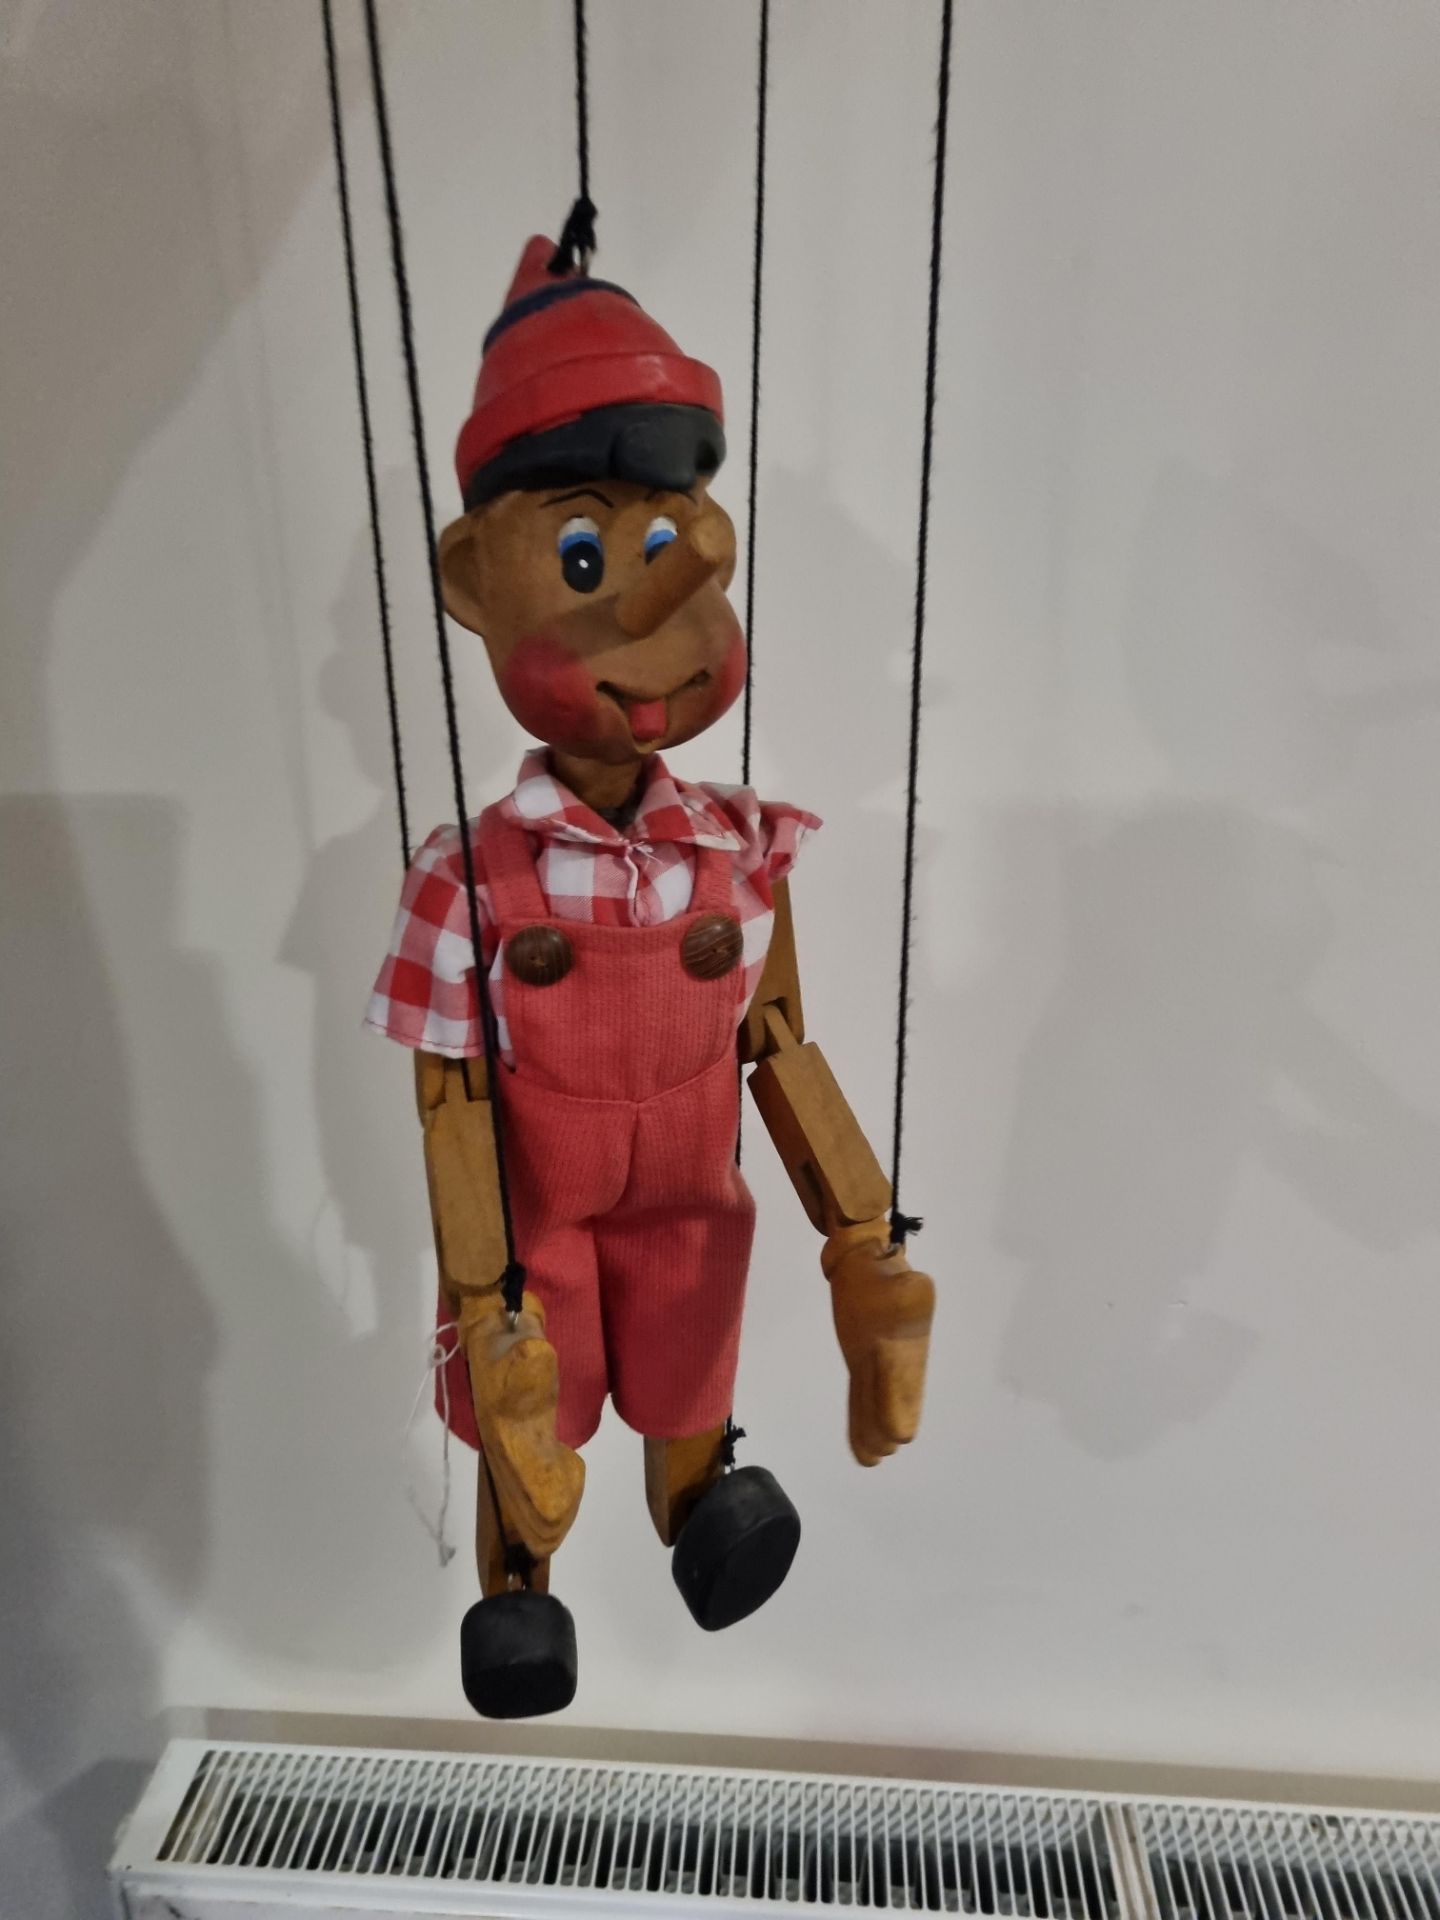 Pinocchio - Handmade All-wooden Marionette/Puppet 500mm high - Image 4 of 4